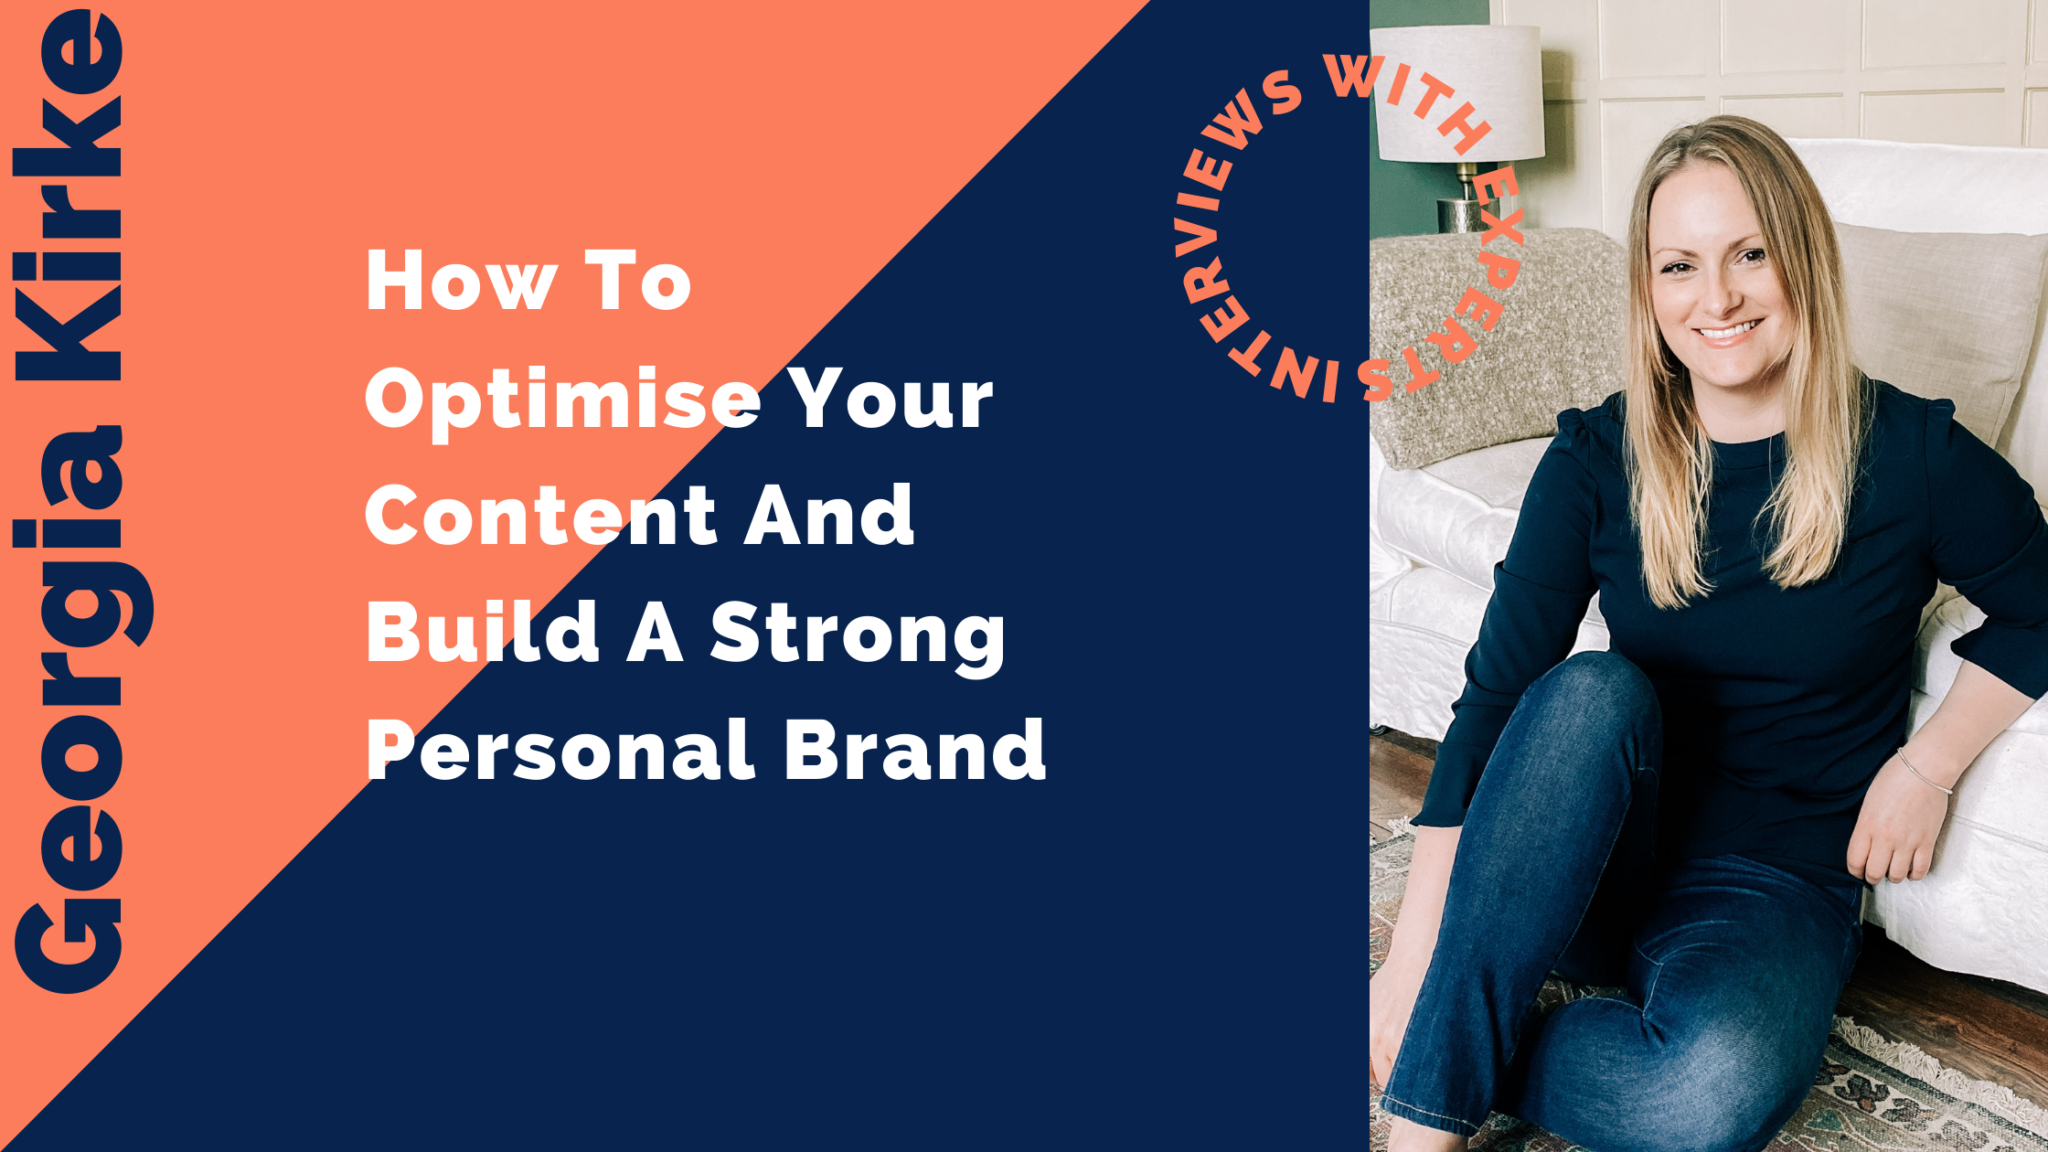 How To Optimise Your Content And Build A Strong Personal Brand